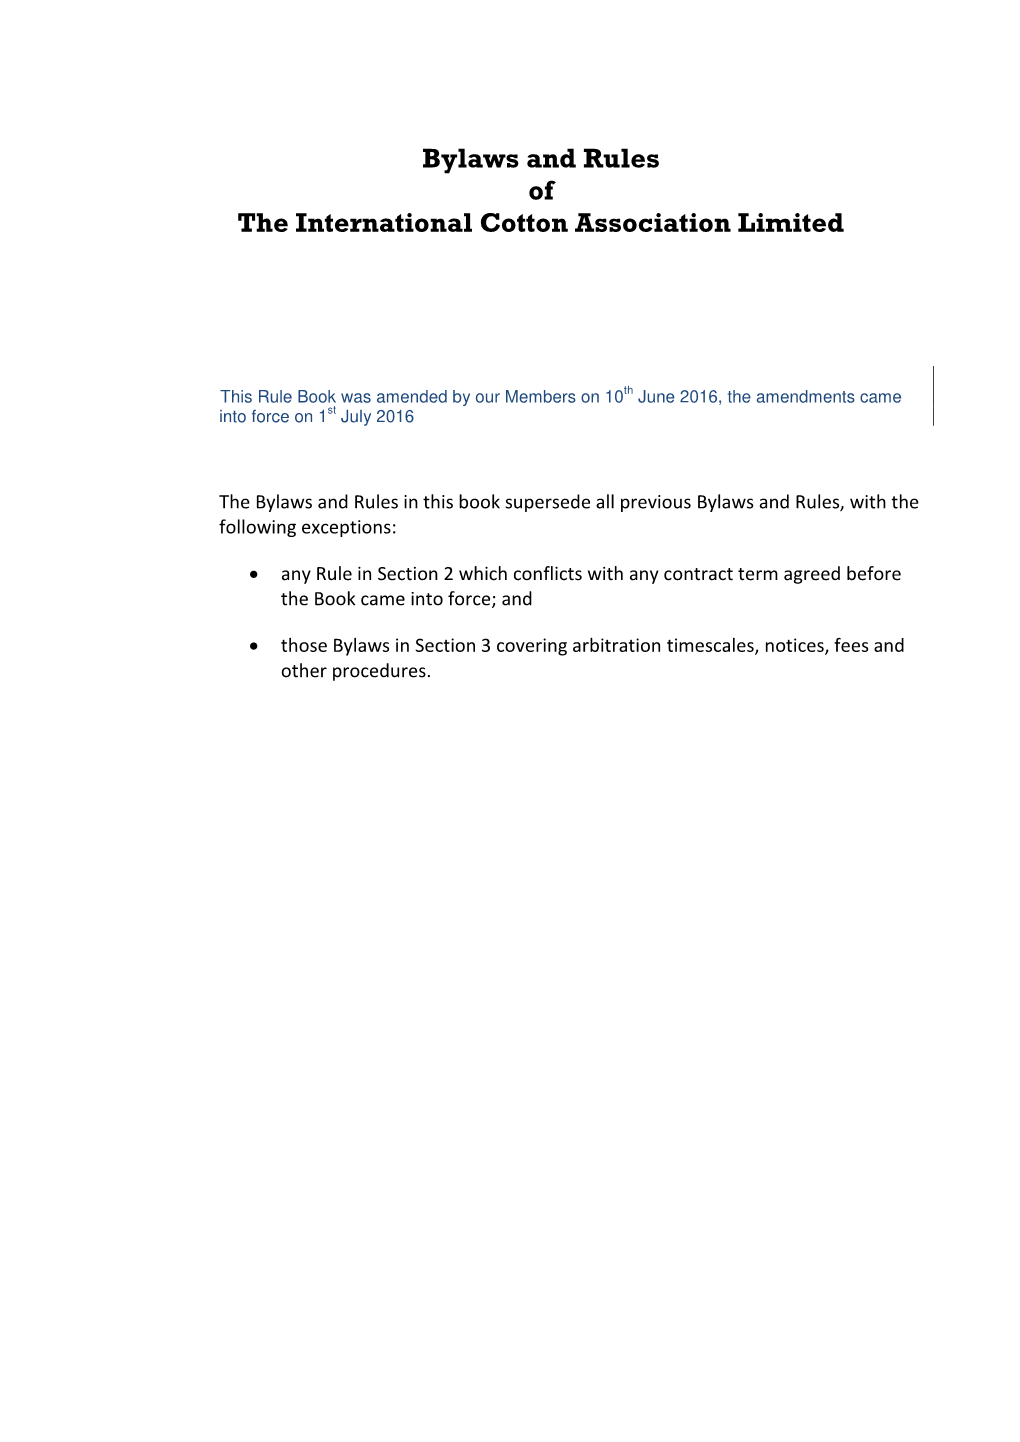 Bylaws and Rules of the International Cotton Association Limited